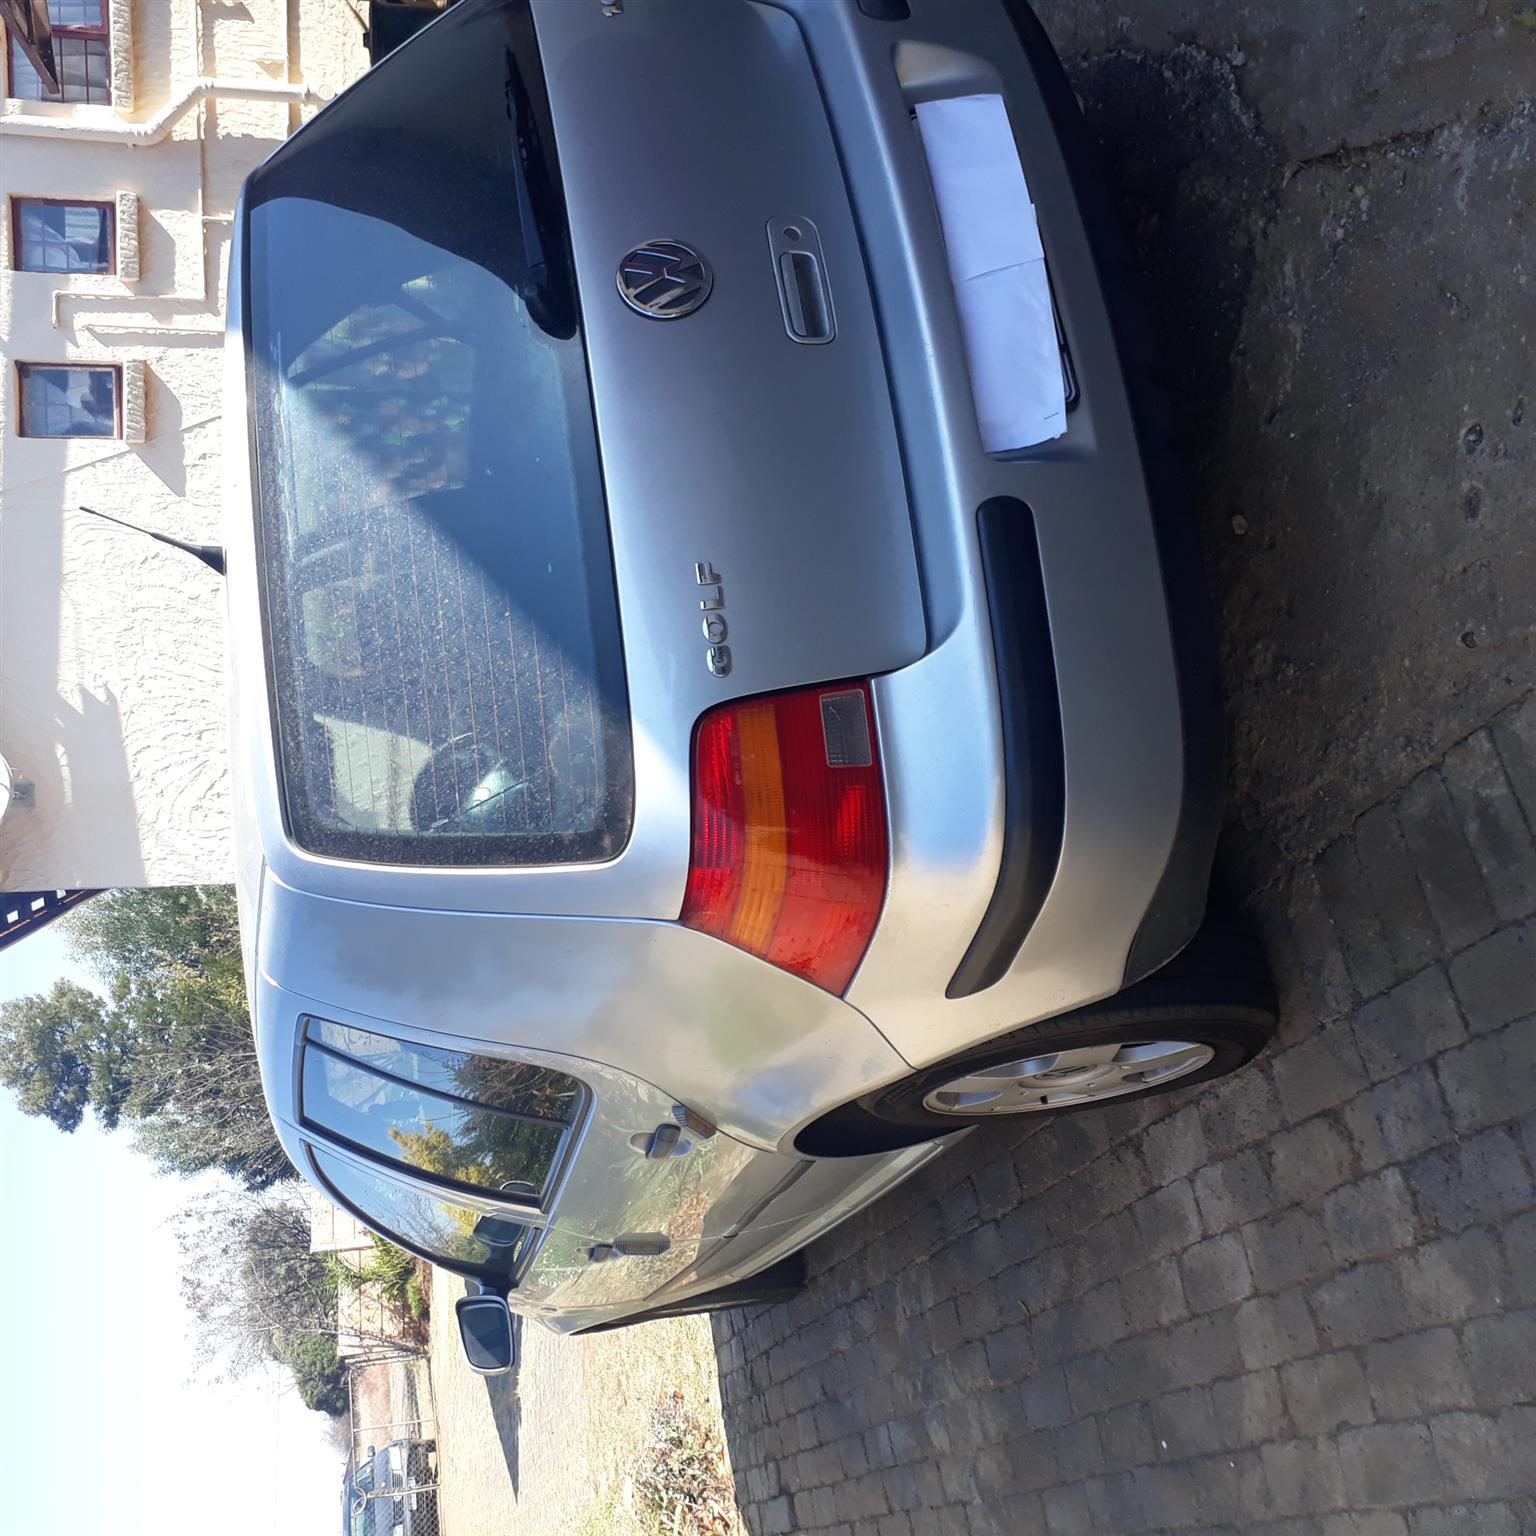 Golf 4 to sell as spares.